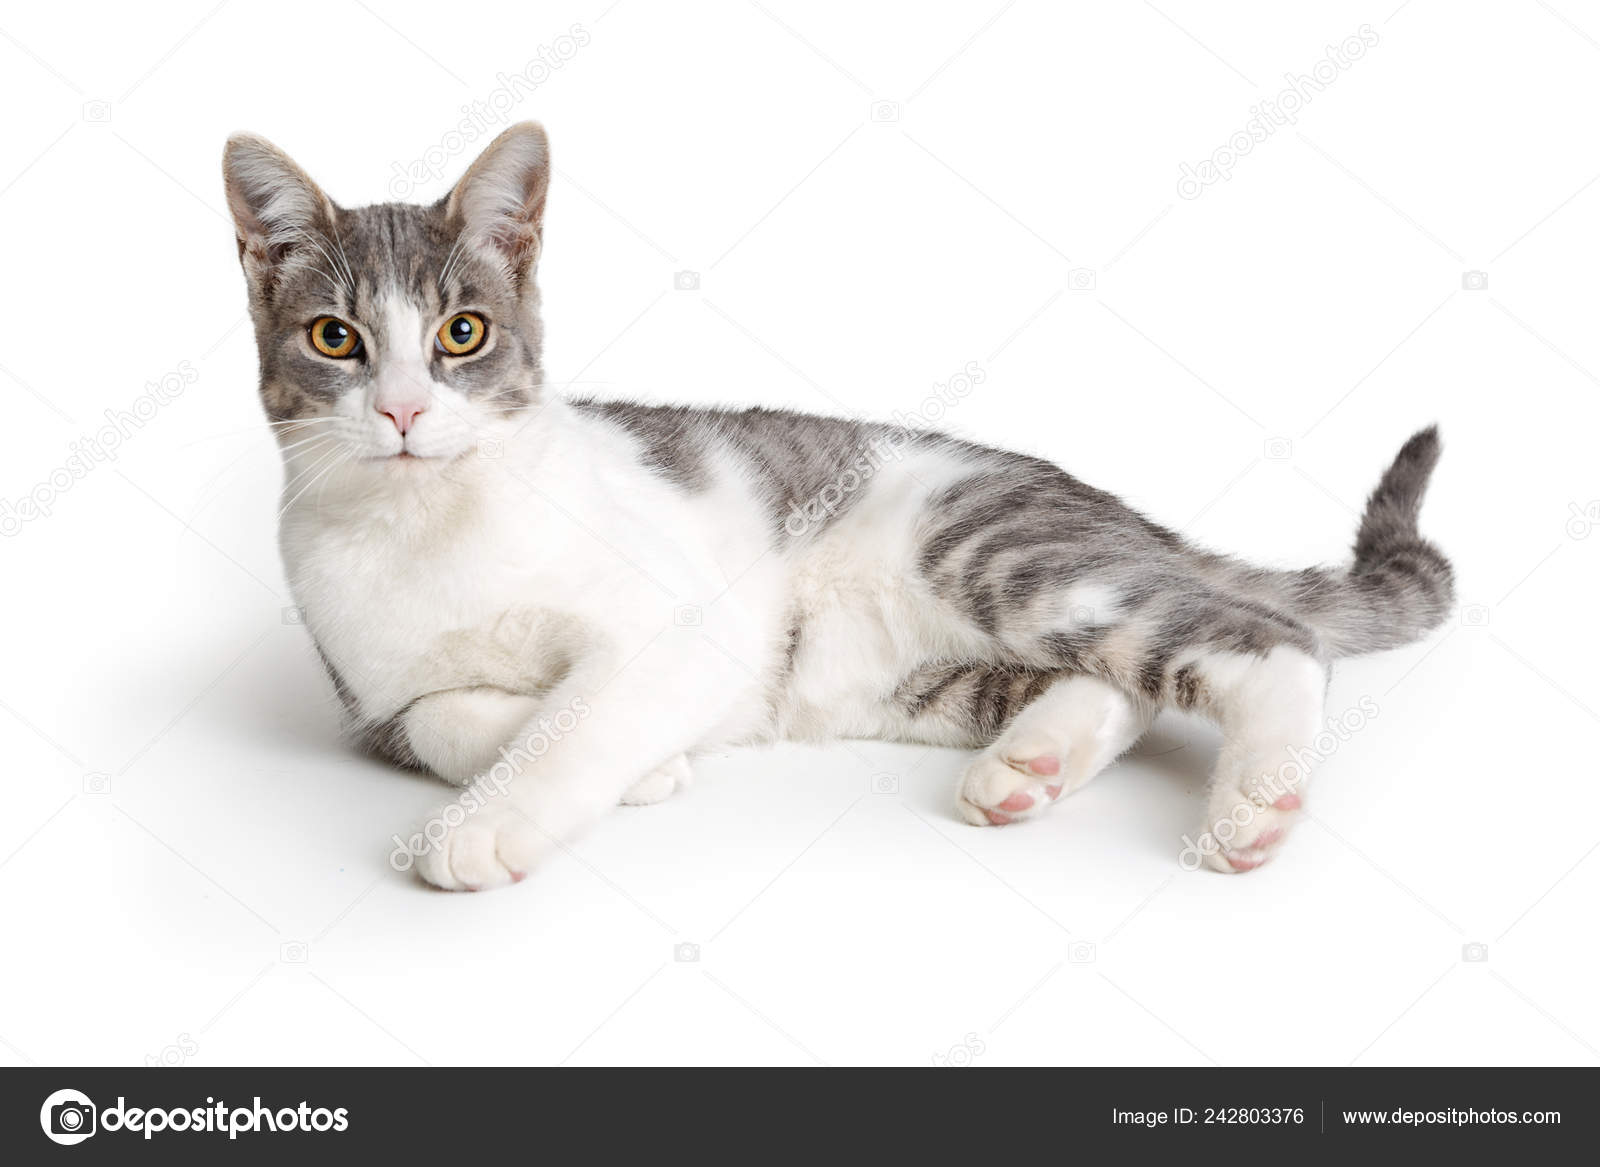 grey and white shorthair cat